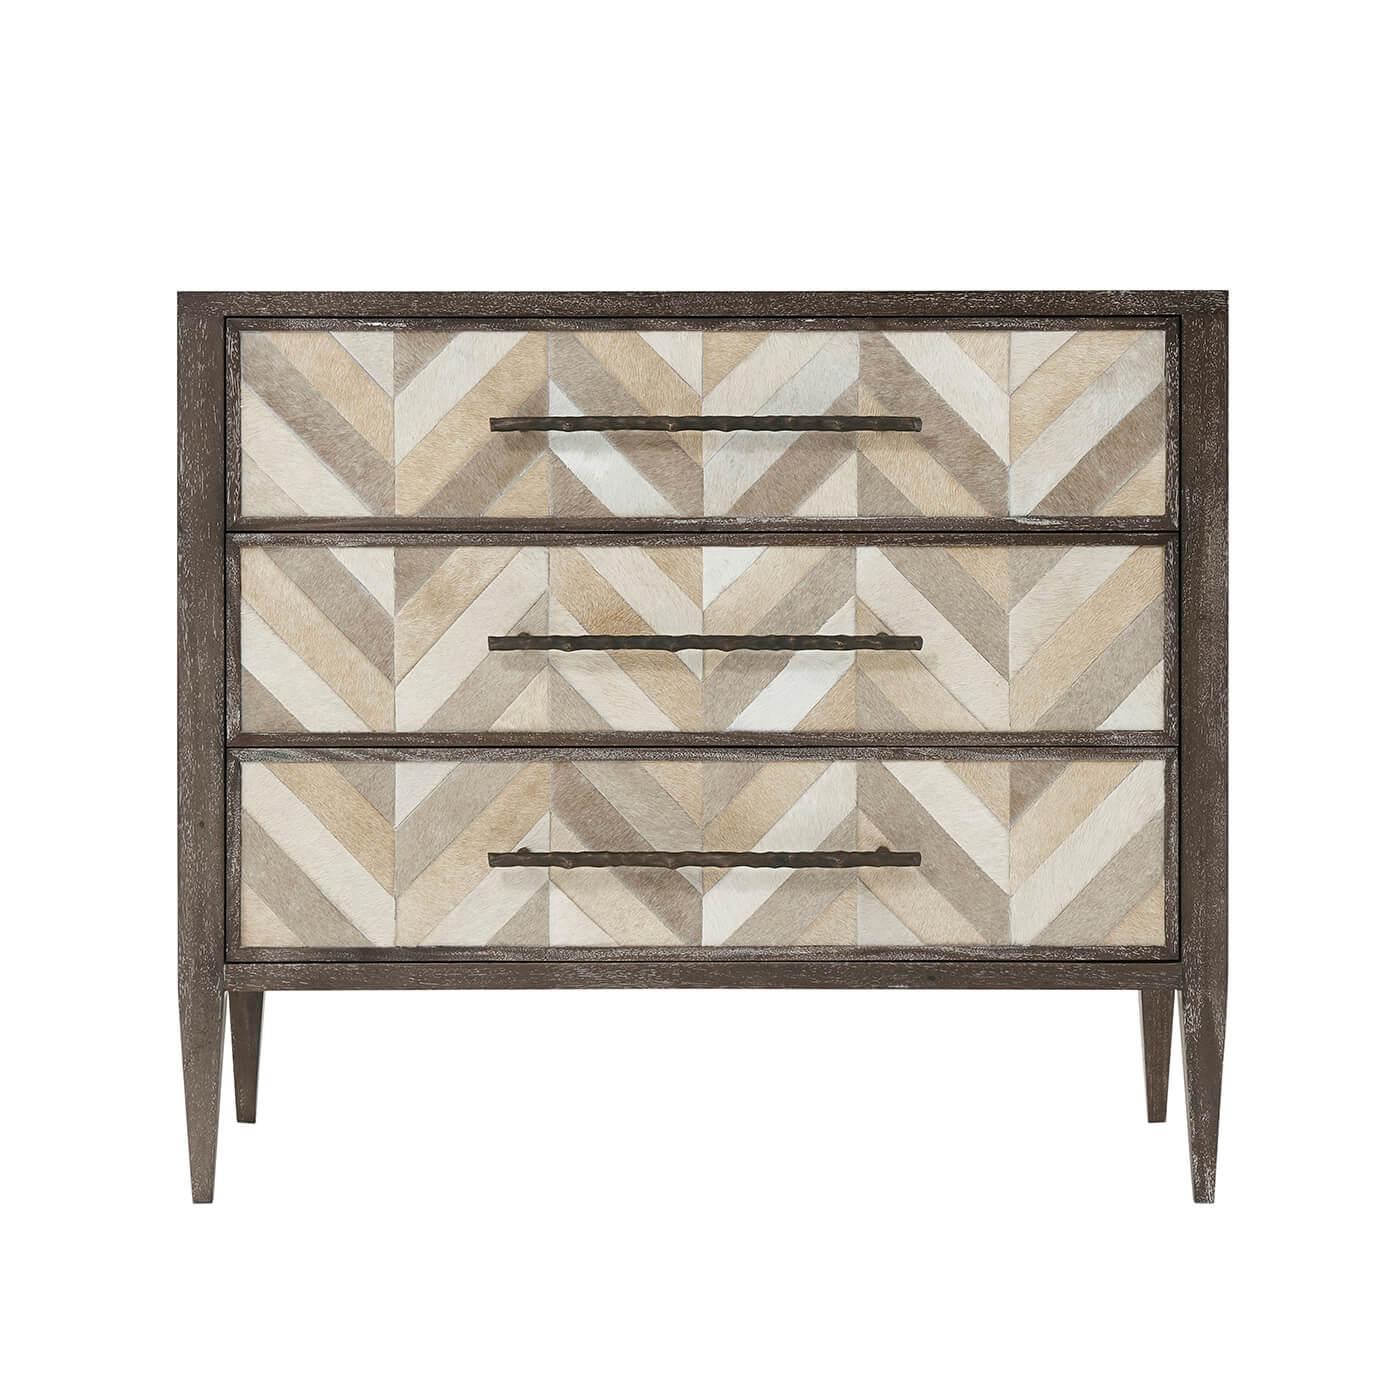 Modern three drawer herringbone parquetry and mesquite finish mahogany dresser. Each drawer is covered with hair-on-hide and with cast brass handles and self-closing drawers.

Dimensions: 39